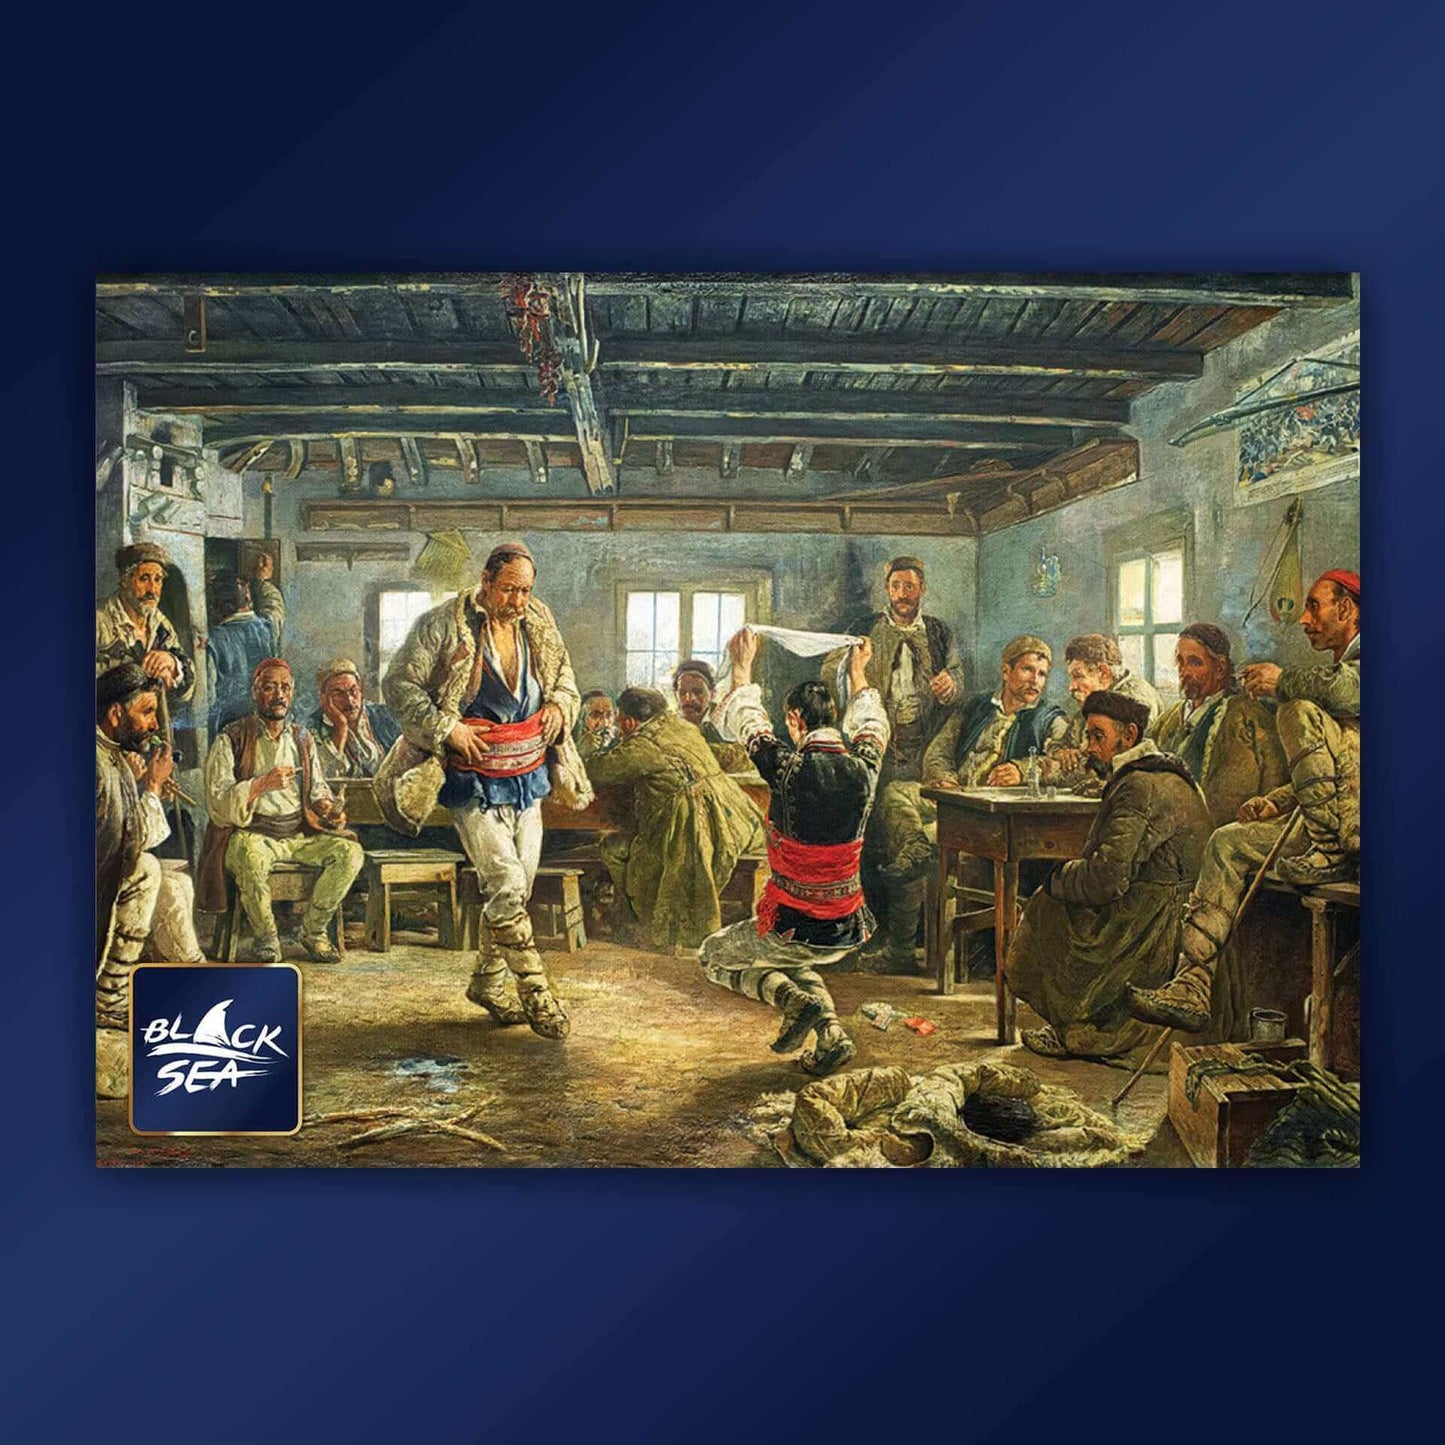 Puzzle Black Sea 2000 pieces - Ruchenitsa, James D. Bourchier, a correspondent for The Times in Bulgaria, was a vivid fan of the country. Perhaps it was fate that brought him together with two other distinguished men in the tavern in the village of Bistri